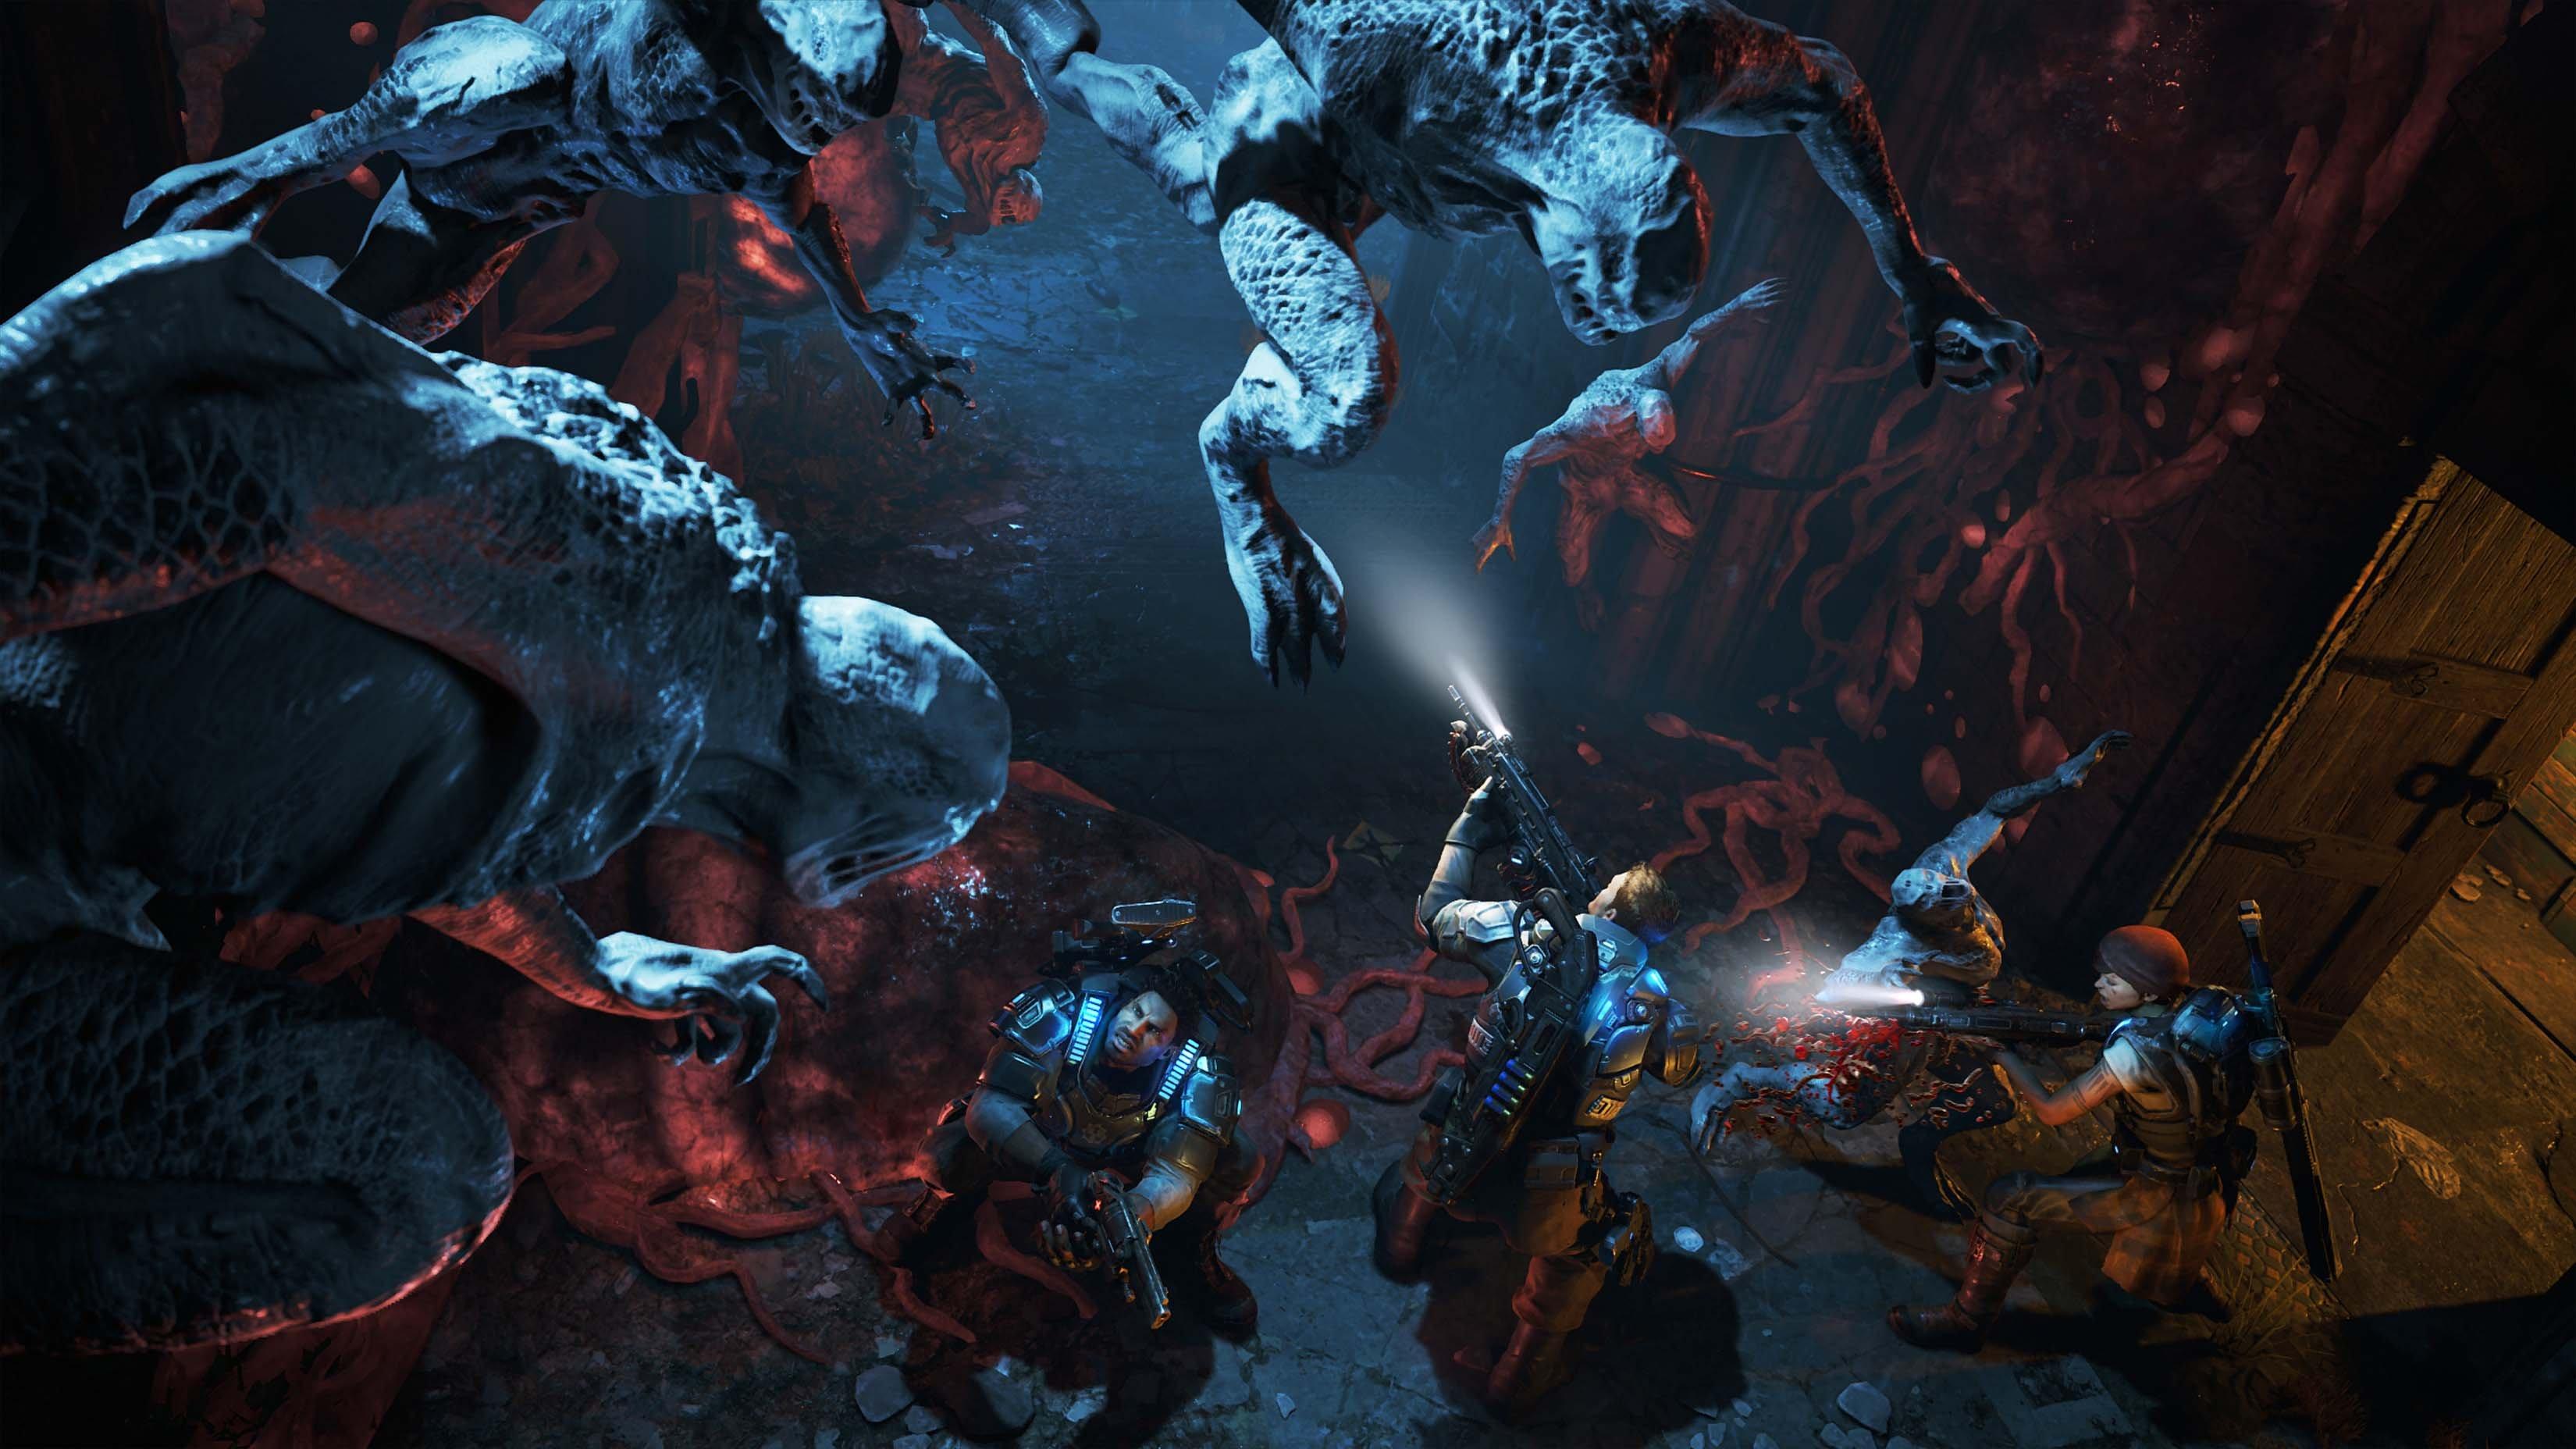 Gears of War 4 release date: LIVE on Xbox One and PC as new update